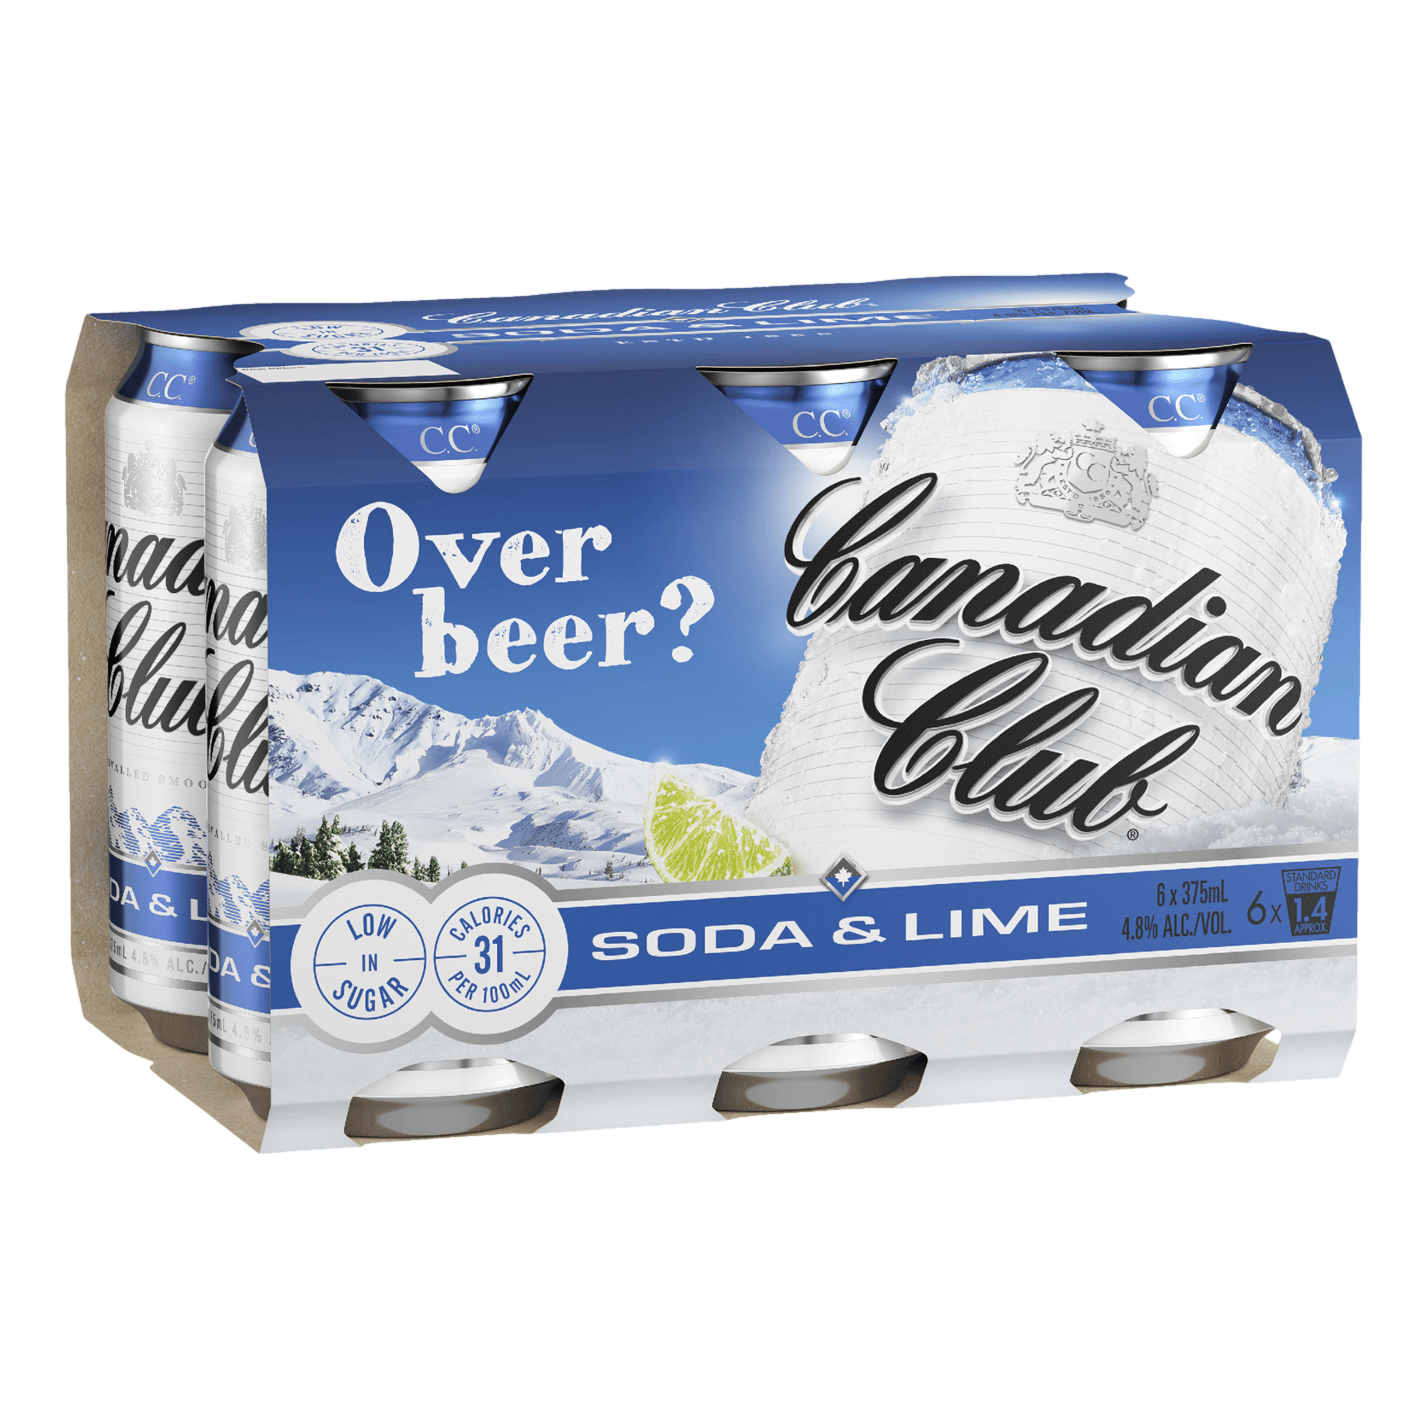 Canadian Club Whisky Soda & Lime 375ml Can 6 Pack